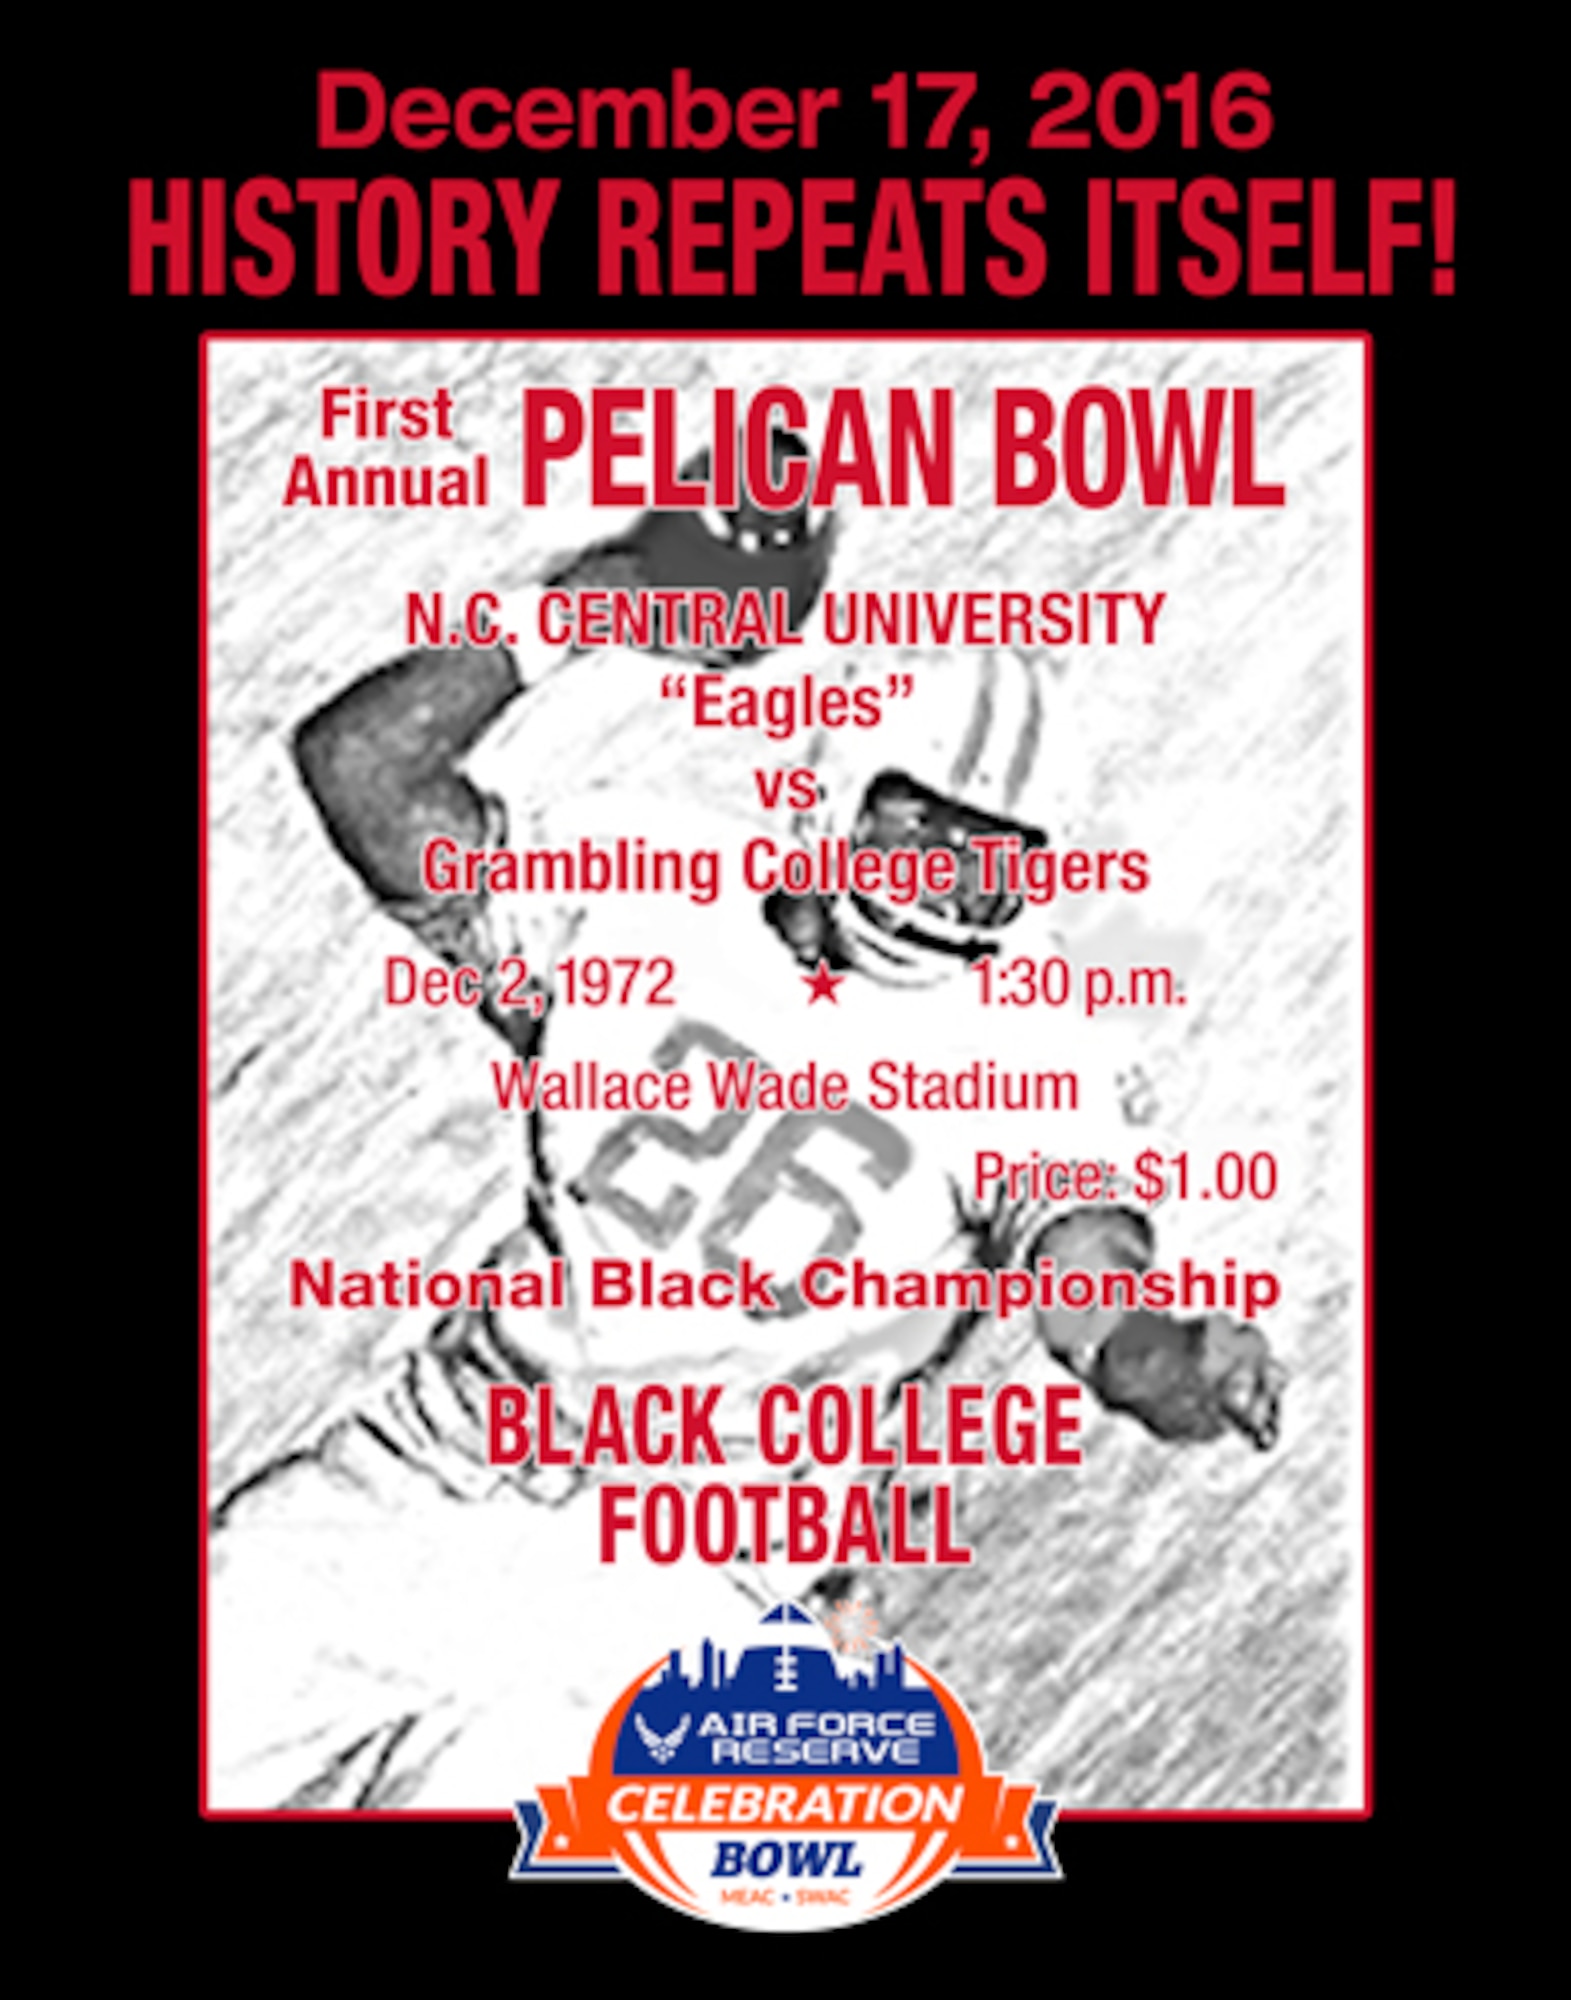 The Grambling State University Tigers, led by Head Coach Broderick Fobbs, are set to take on the North Carolina Central University Eagles, led by Head Coach Jerry Mack. This marks the second year for the Air Force Reserve Celebration Bowl, which showcases the heritage, legacy, pageantry and tradition of HBCUs. The game will be televised live on ABC to open the bowl season. The postseason college football bowl game will kick off at noon ET on Saturday at the Georgia Dome in Atlanta.
